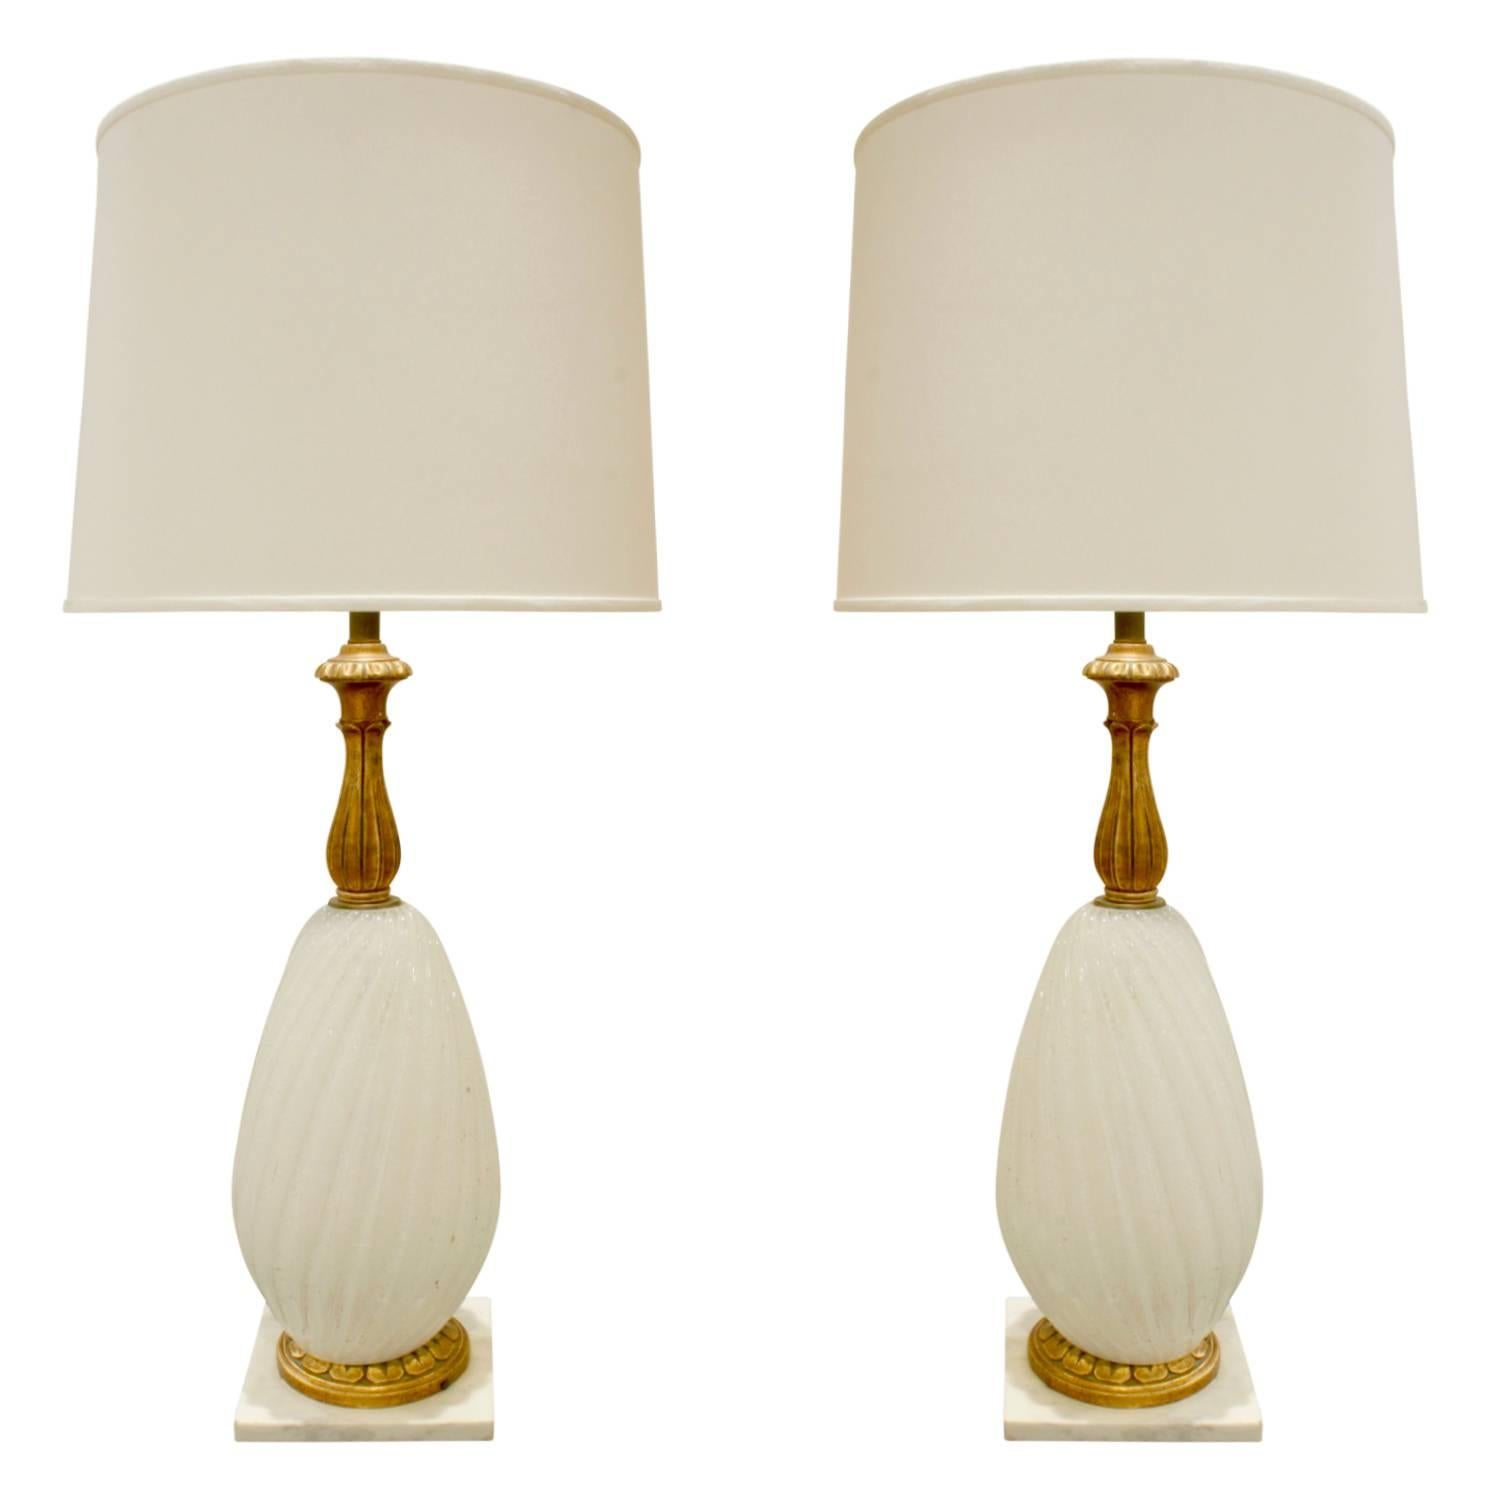 Seguso Pair of Gilded Handblown Glass Table Lamps, 1950s For Sale